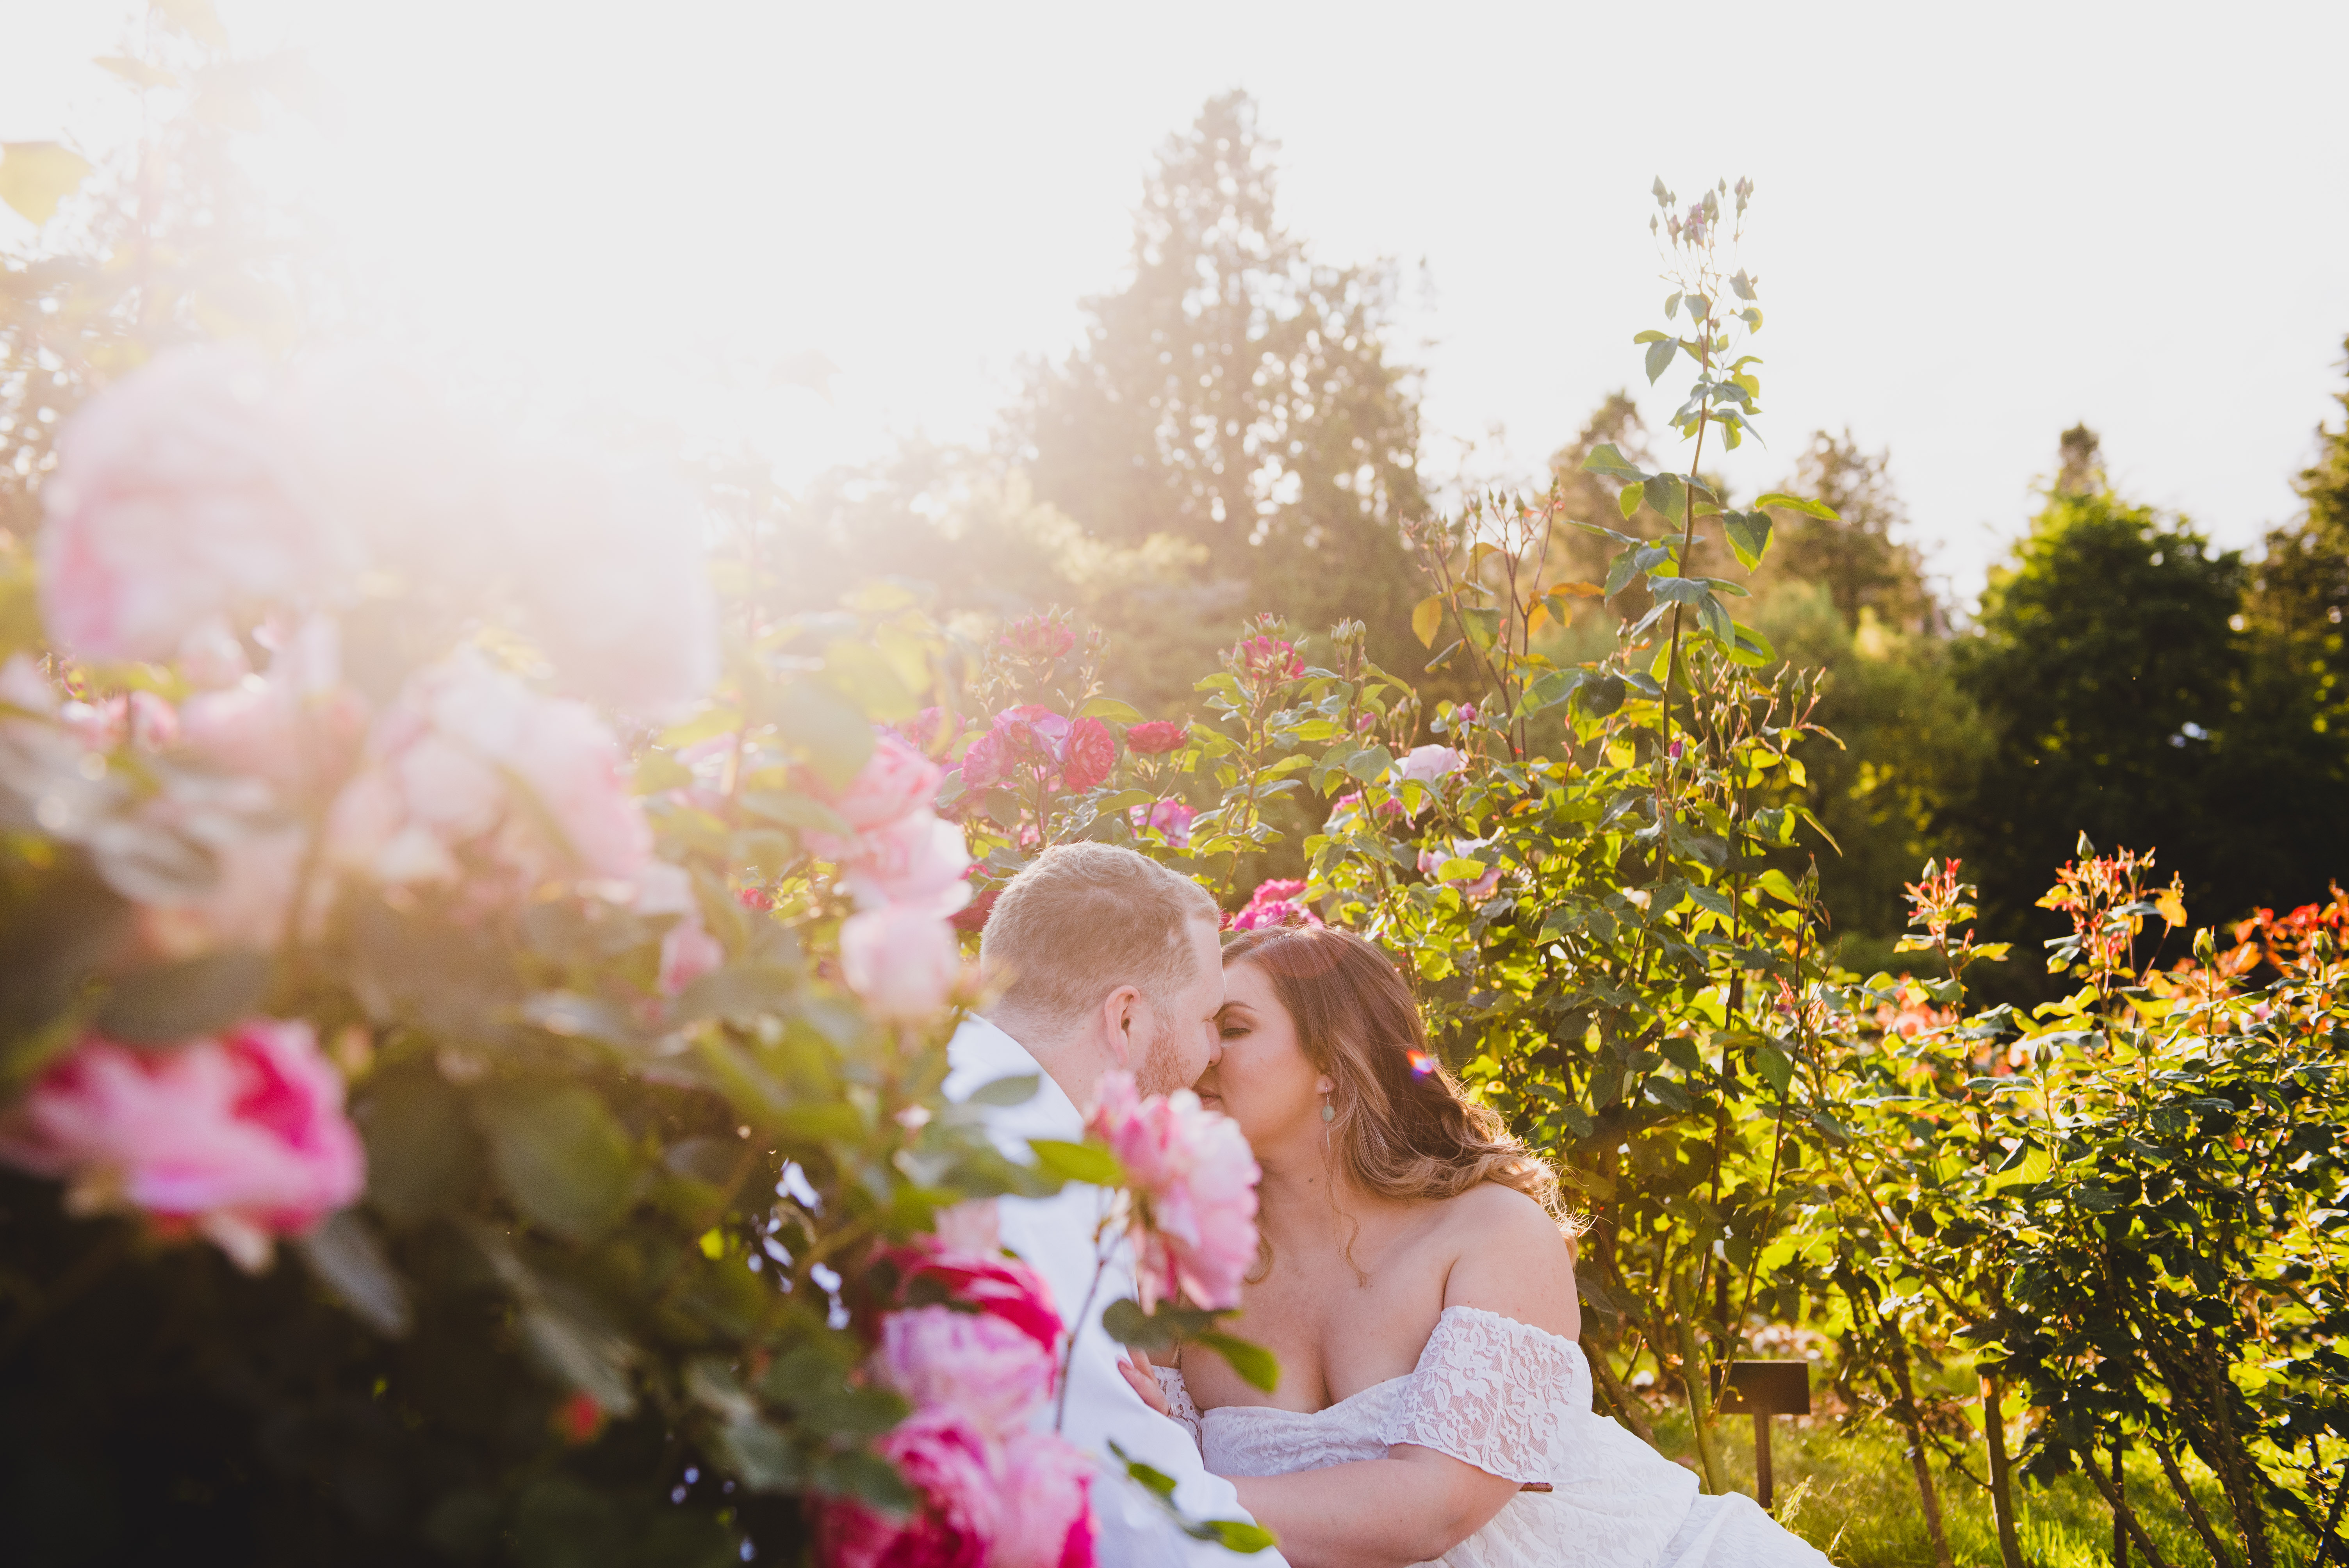 Sunlit Garden Engagement Portraits of Couple | Why Engagement Sessions are Important | Couple Photographed by Tacoma Wedding Photographer Amanda Howse